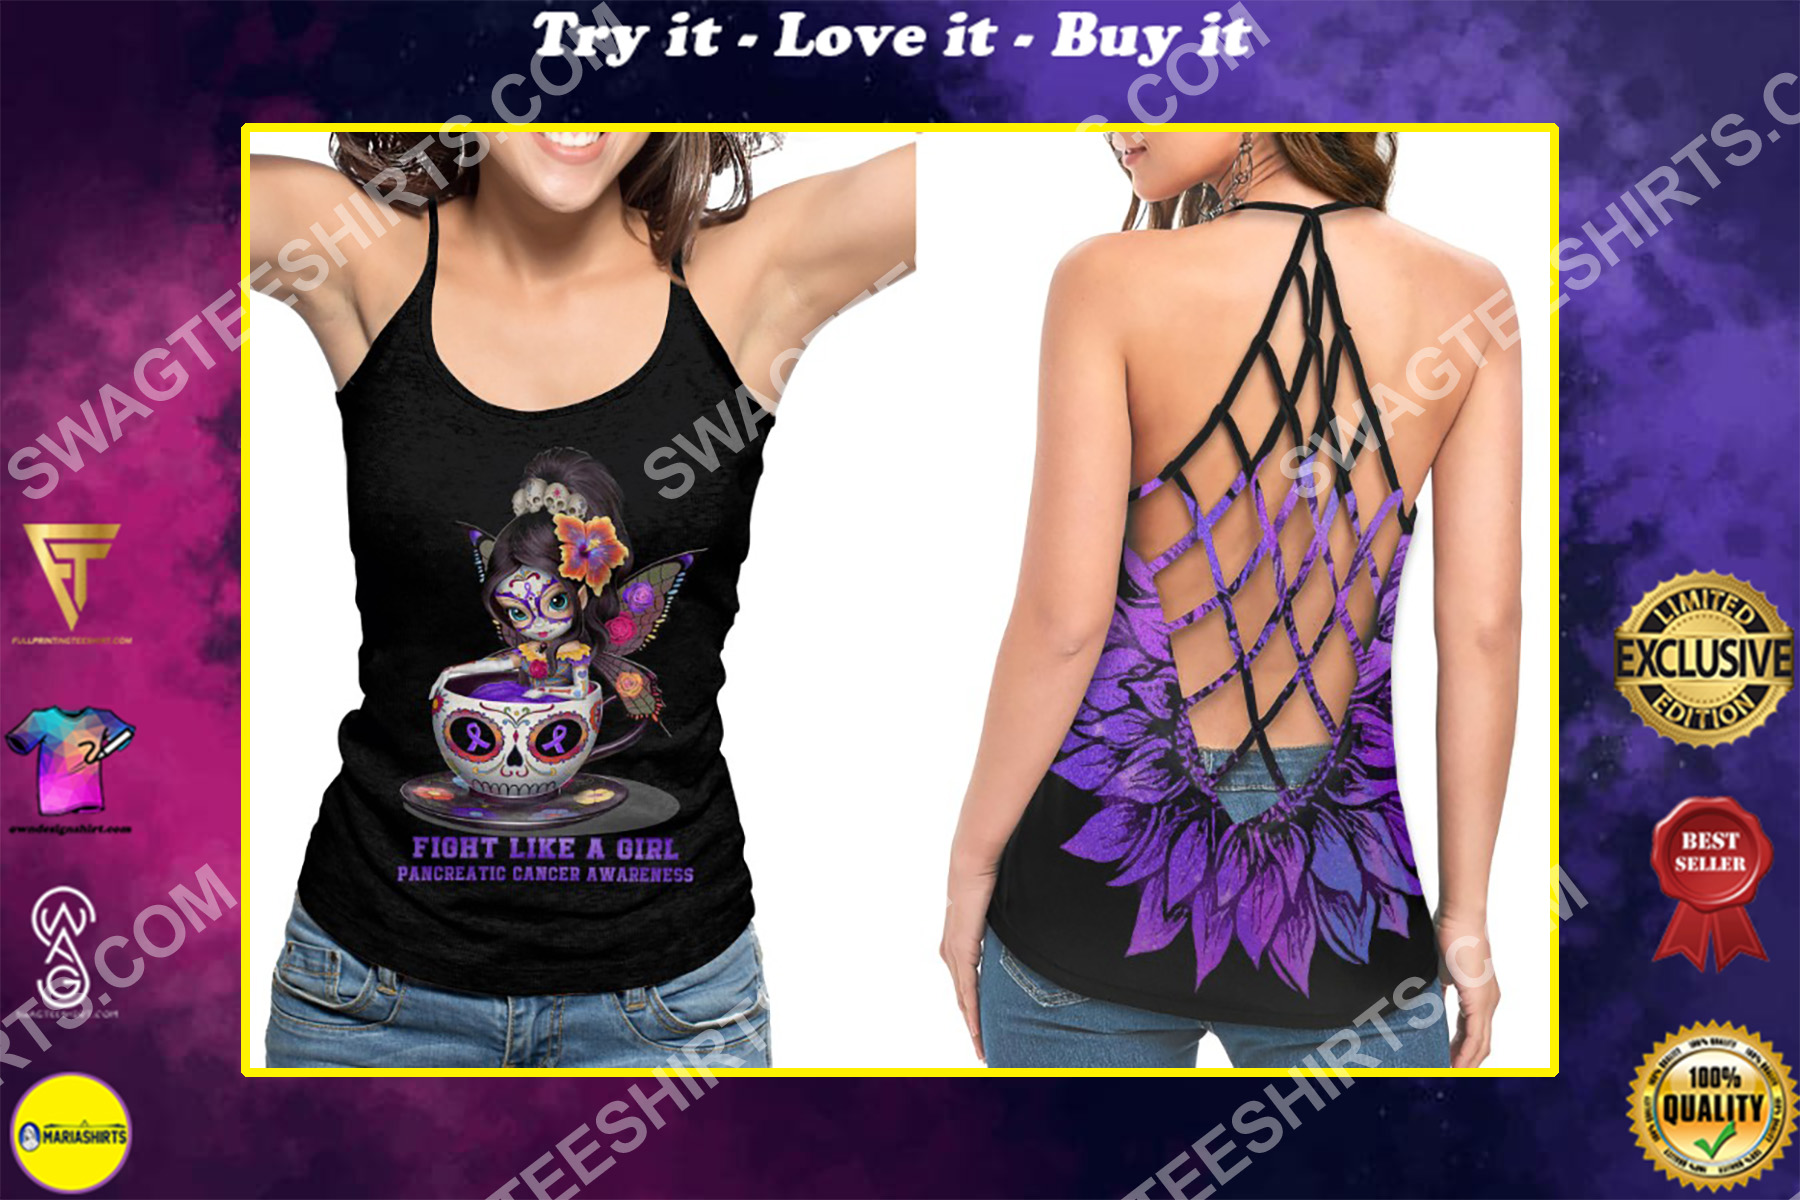 pancreatic cancer awareness fight like a girl strappy back tank top